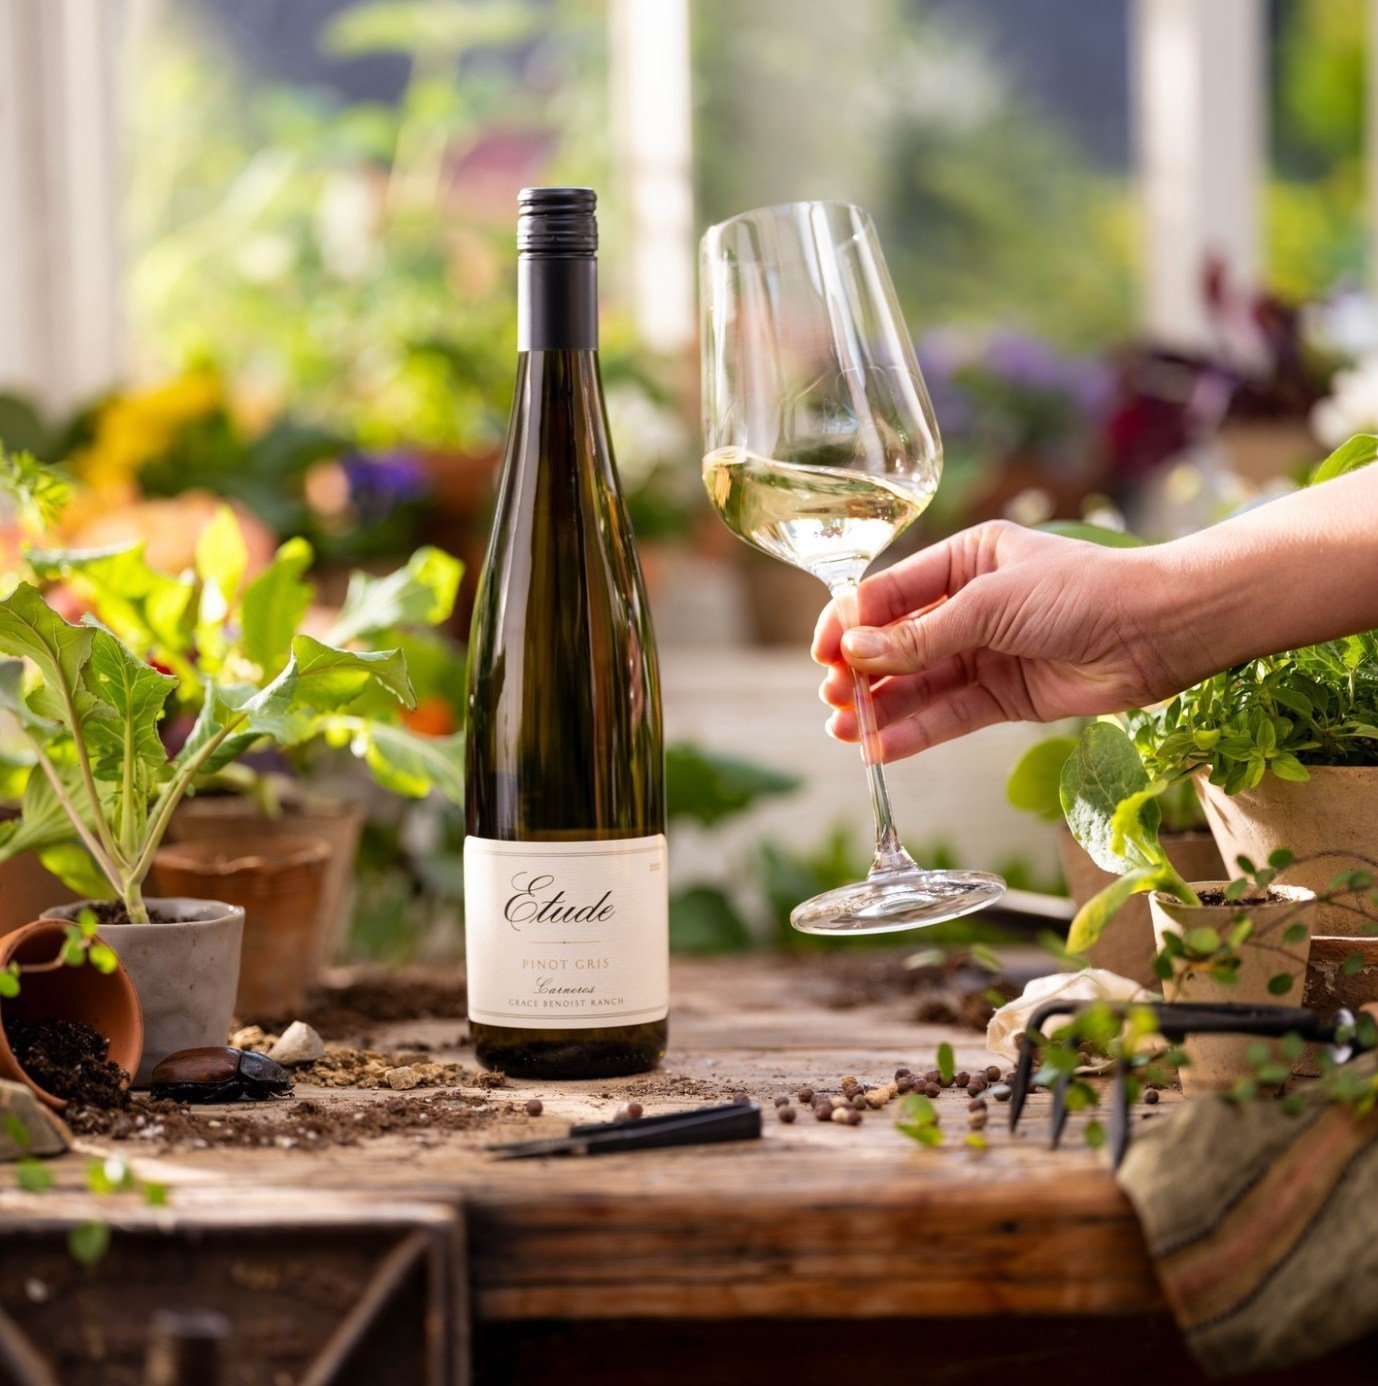 Warm, sunny days? We've got a wine for that. ☀️🍷⁠
⁠
@etudewines' Carneros Pinot Gris is a refreshing sipper that offers lovely white floral aromatics delicately interwoven with subtle tropical notes. Go ahead, take a sip.⁠
⁠
Get your bottle at the l